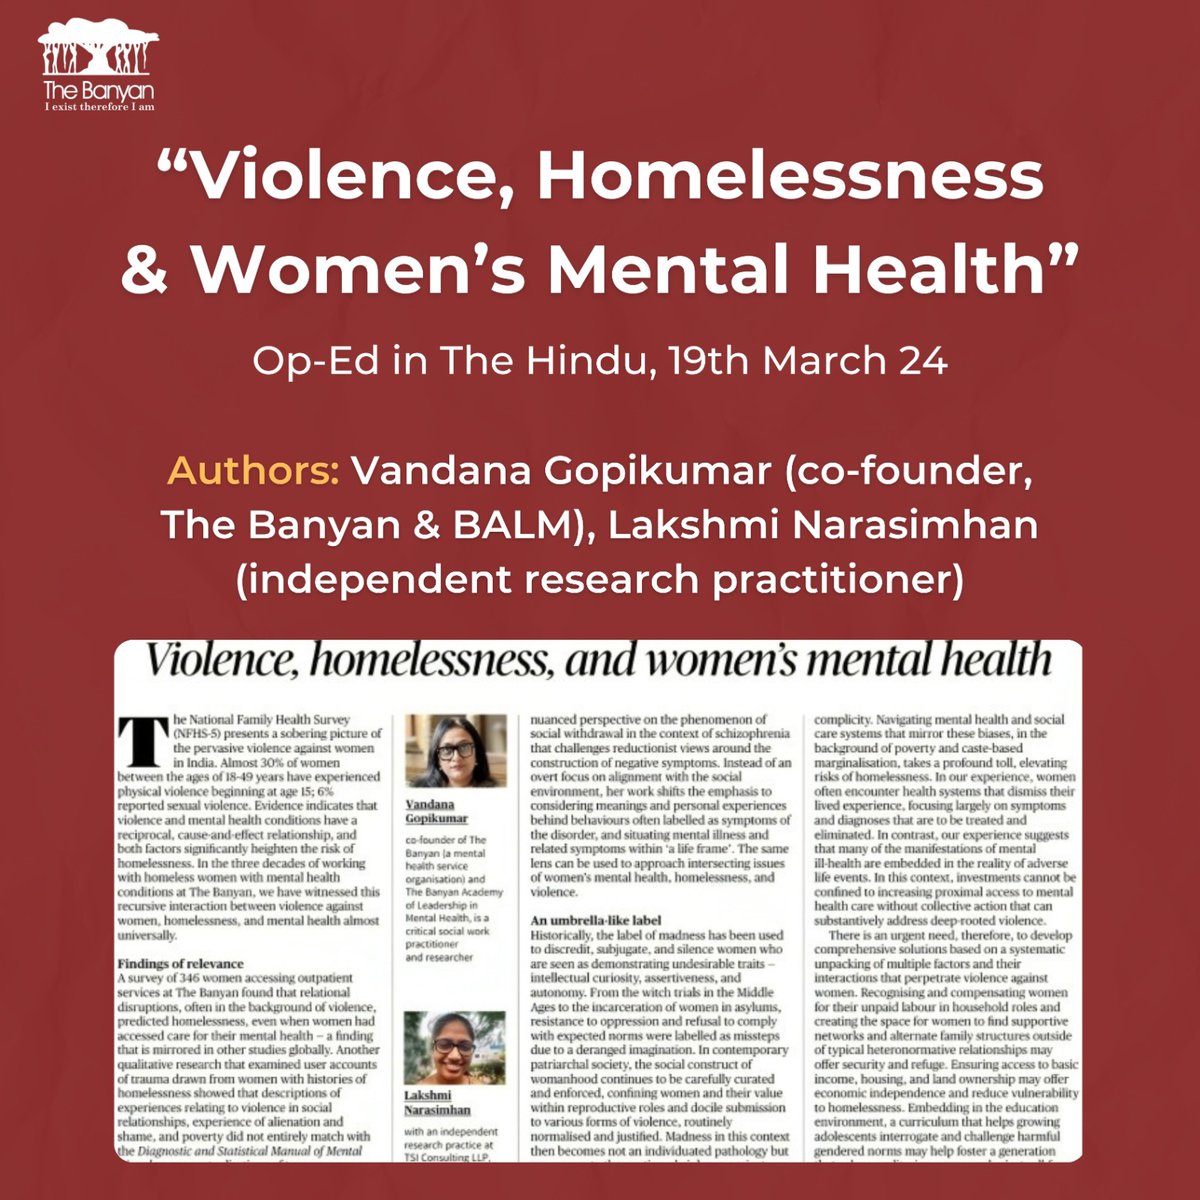 Navigating the Crossroads: Violence, Homelessness, and Women's Mental Health. This article is authored by Vandana Gopikumar, co-founder of The Banyan and BALM, and Lakshmi Narasimhan, an independent research practitioner at TSI Consulting LLP. Read here: tr.ee/_0hg0KH-Vo